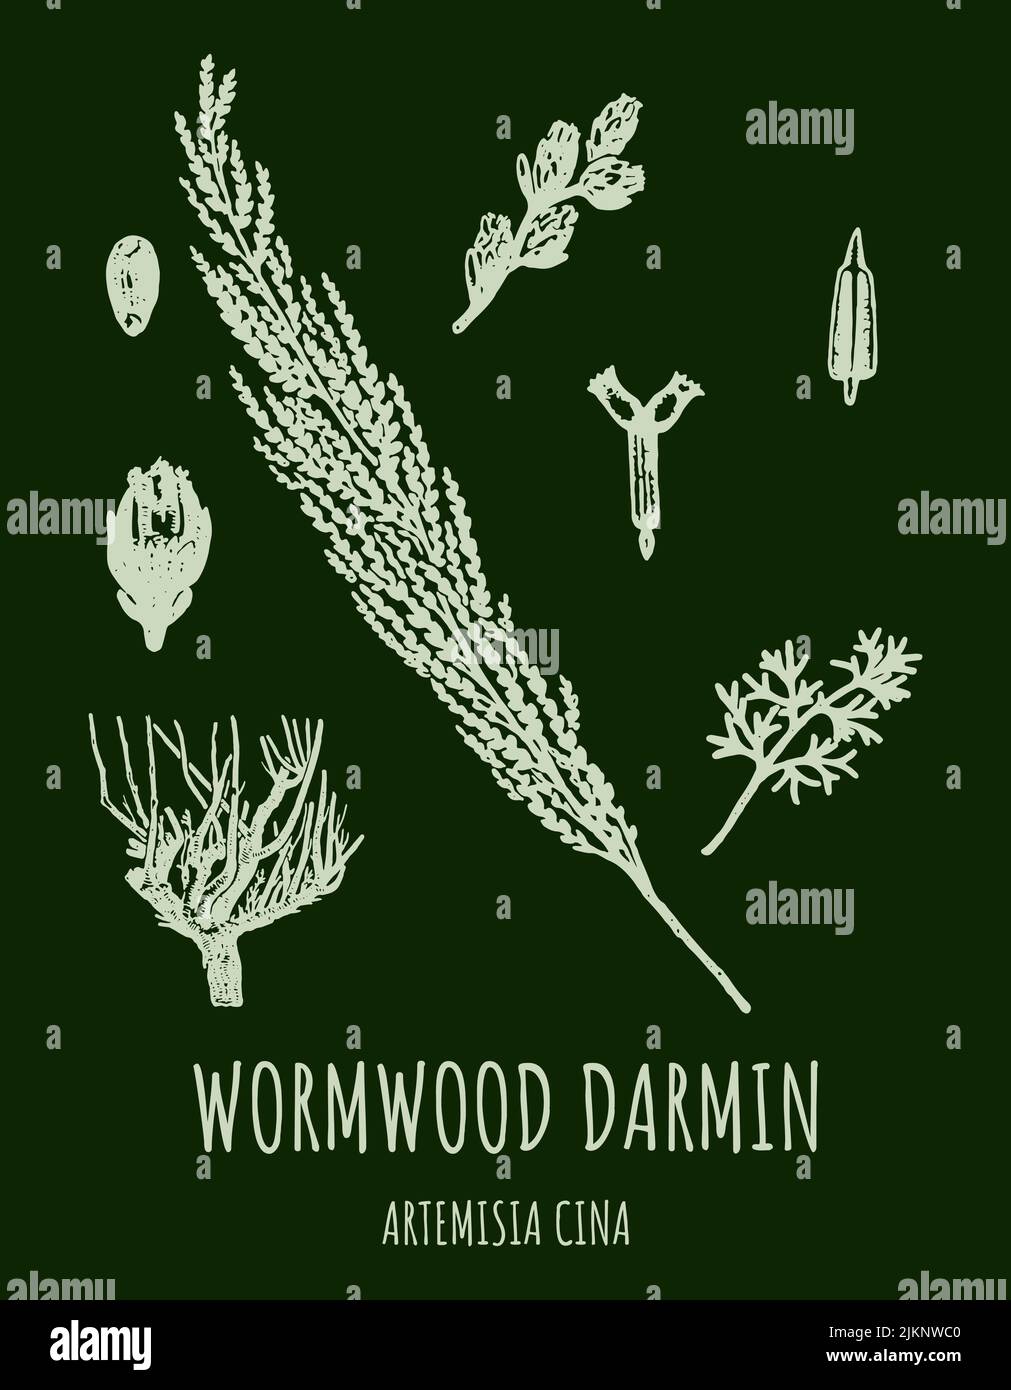 DARMIN Wormwood (Artemisia cina) illustration. Wormwood branch, leaves and wormwood flowers. Cosmetics and medical plant. Stock Vector